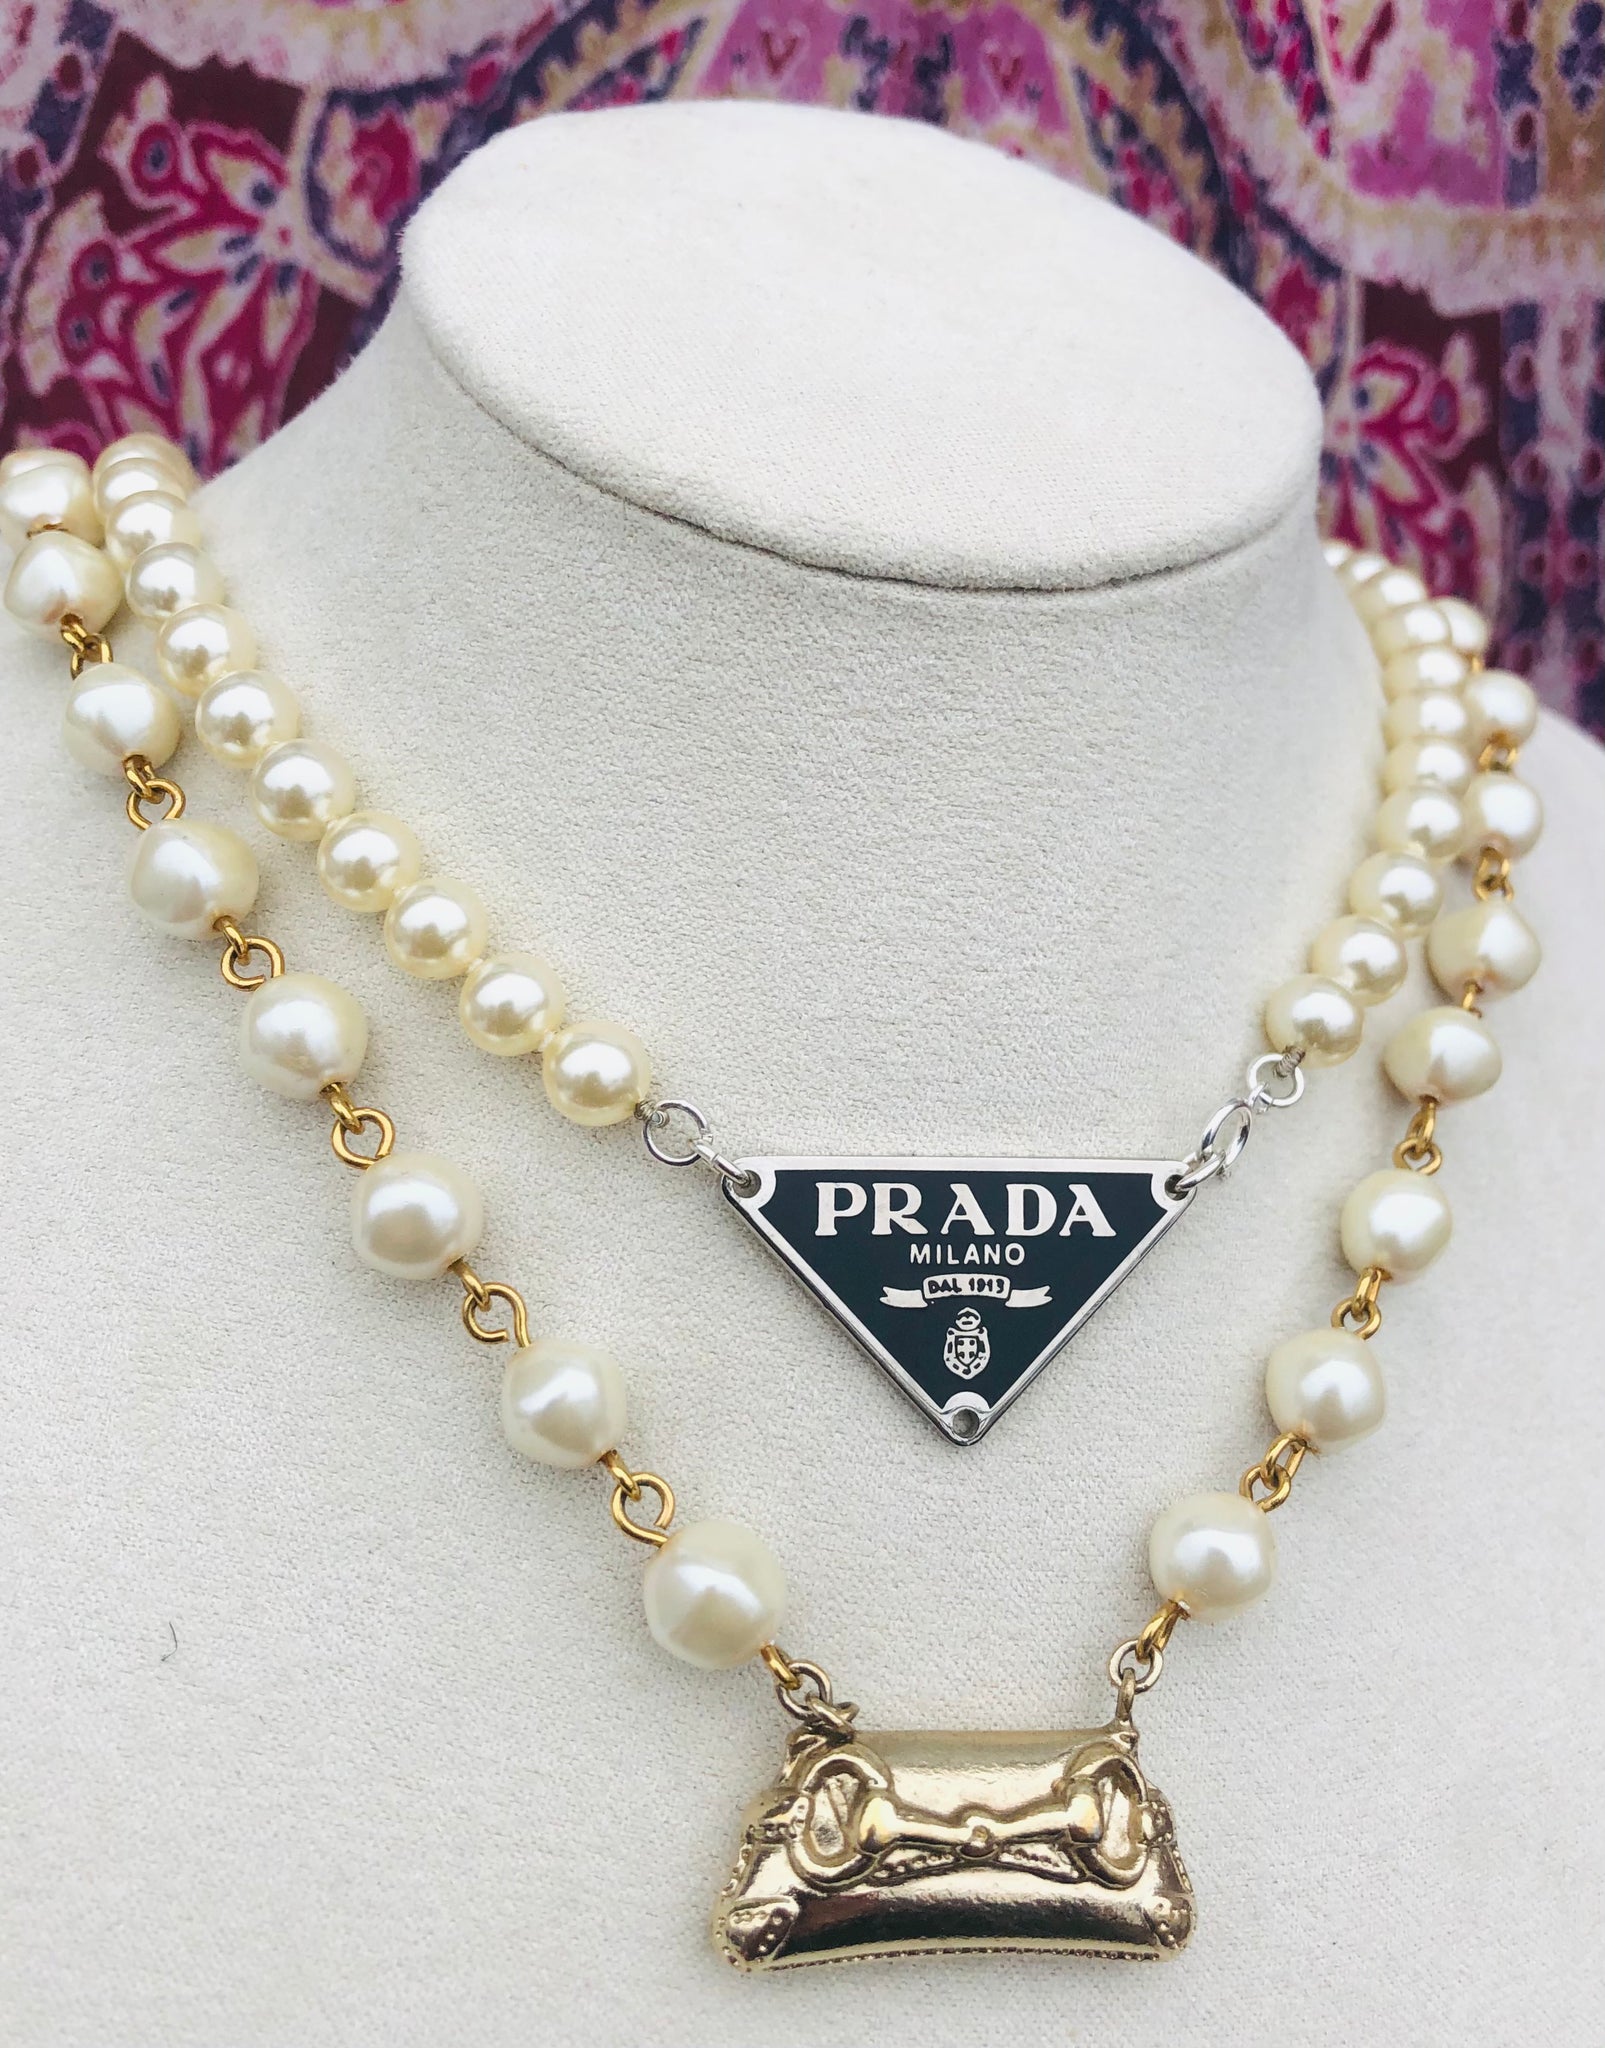 Female Daily Editorial - Timeless Piece: The Pearl Necklace